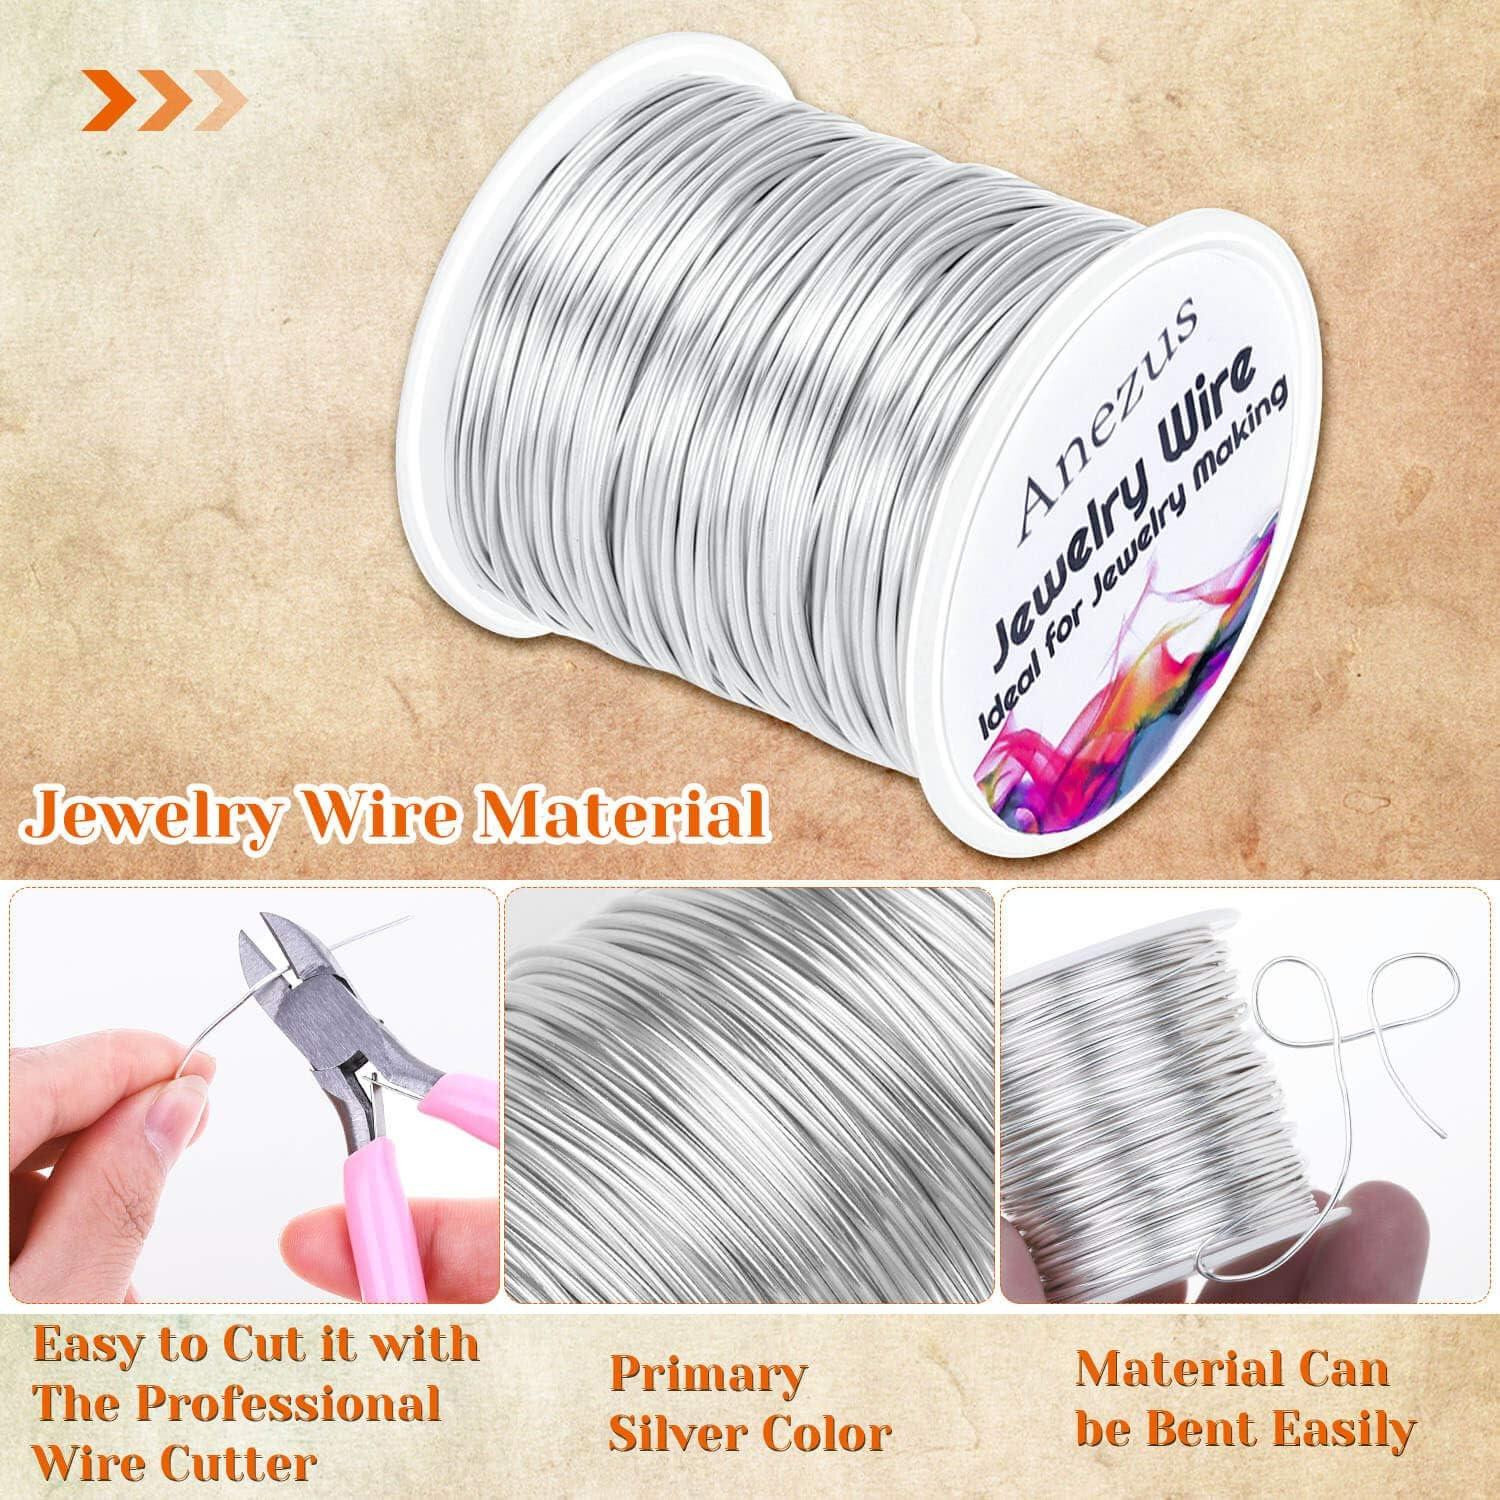  Anezus 18 Gauge Jewelry Wire for Jewelry Making